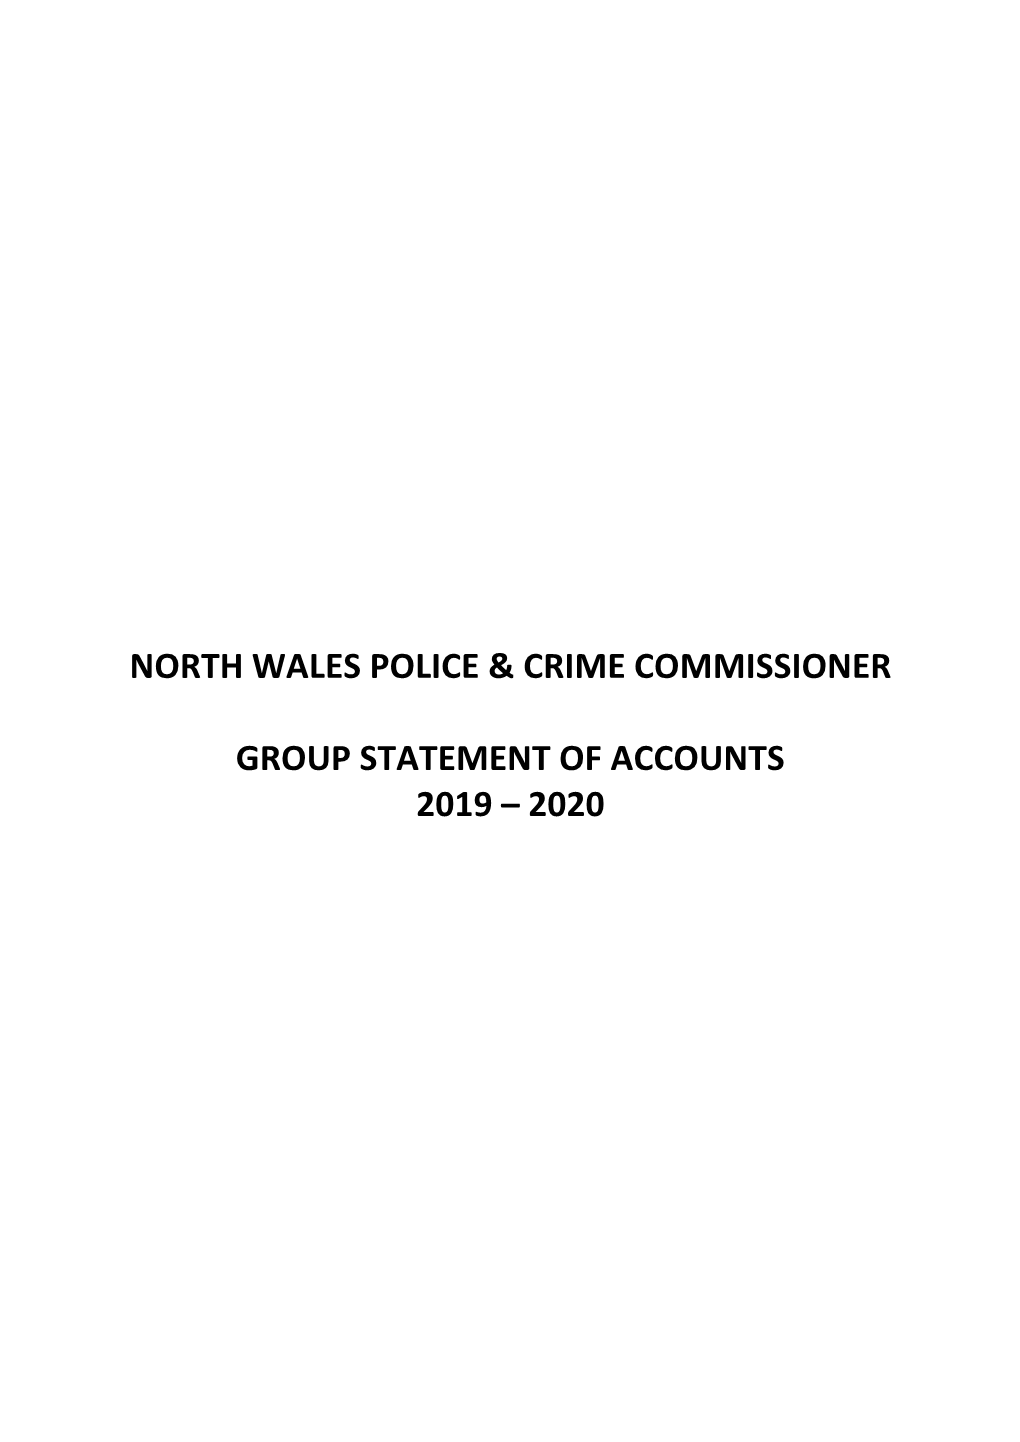 Group and PCC Statement of Accounts 2019-20